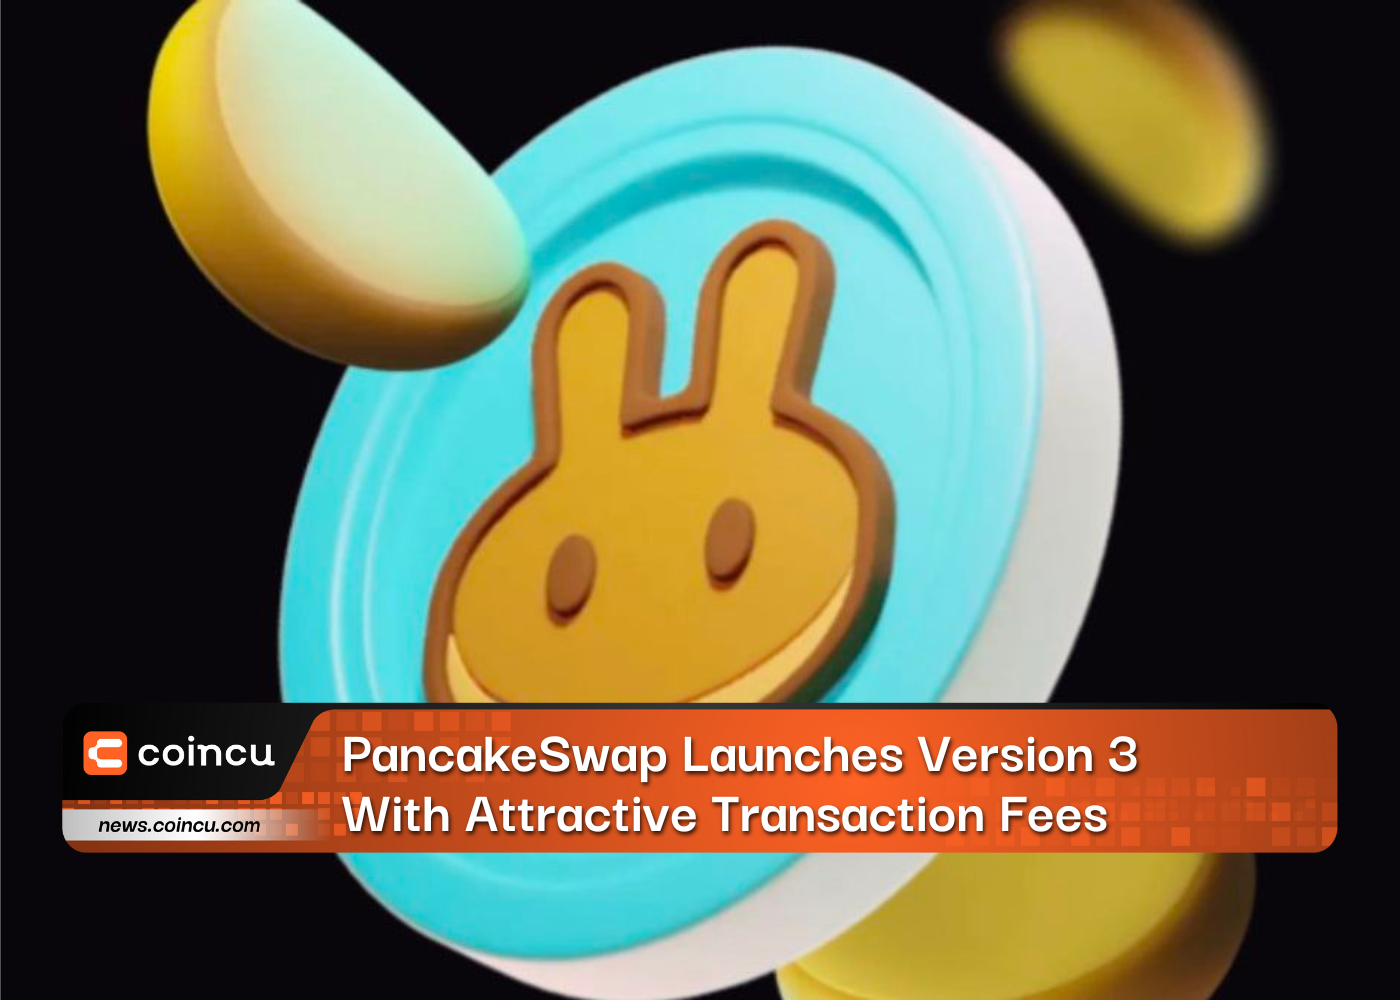 PancakeSwap Launches Version 3 With Attractive Transaction Fees